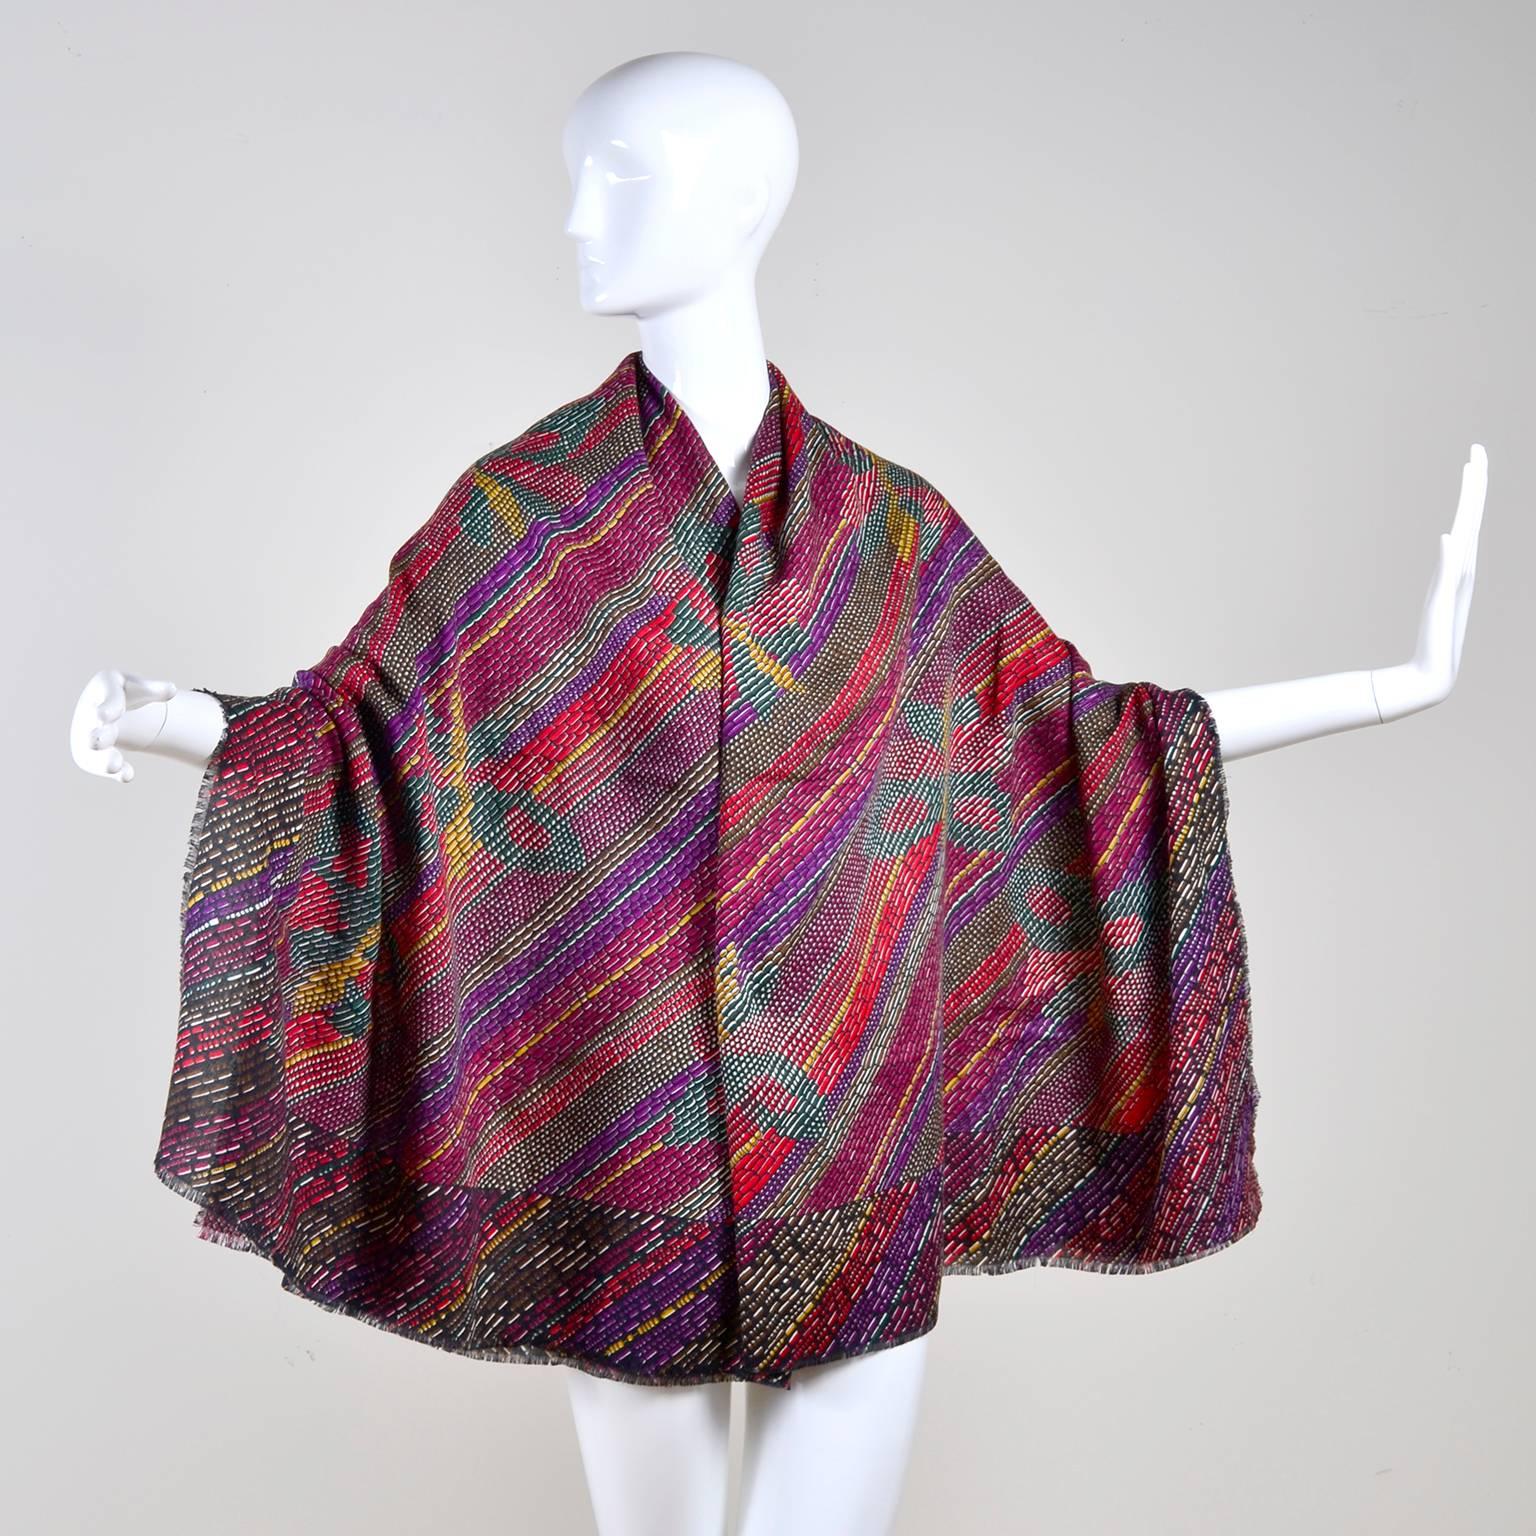 This incredible Bottega Veneta Scarf is absolutely beautiful! This gorgeous scarf was made in Italy and is 70% wool and 30% silk. The abstract pattern is multi colored with beautiful butterflies! This scarf can be worn as a wrap because it is so